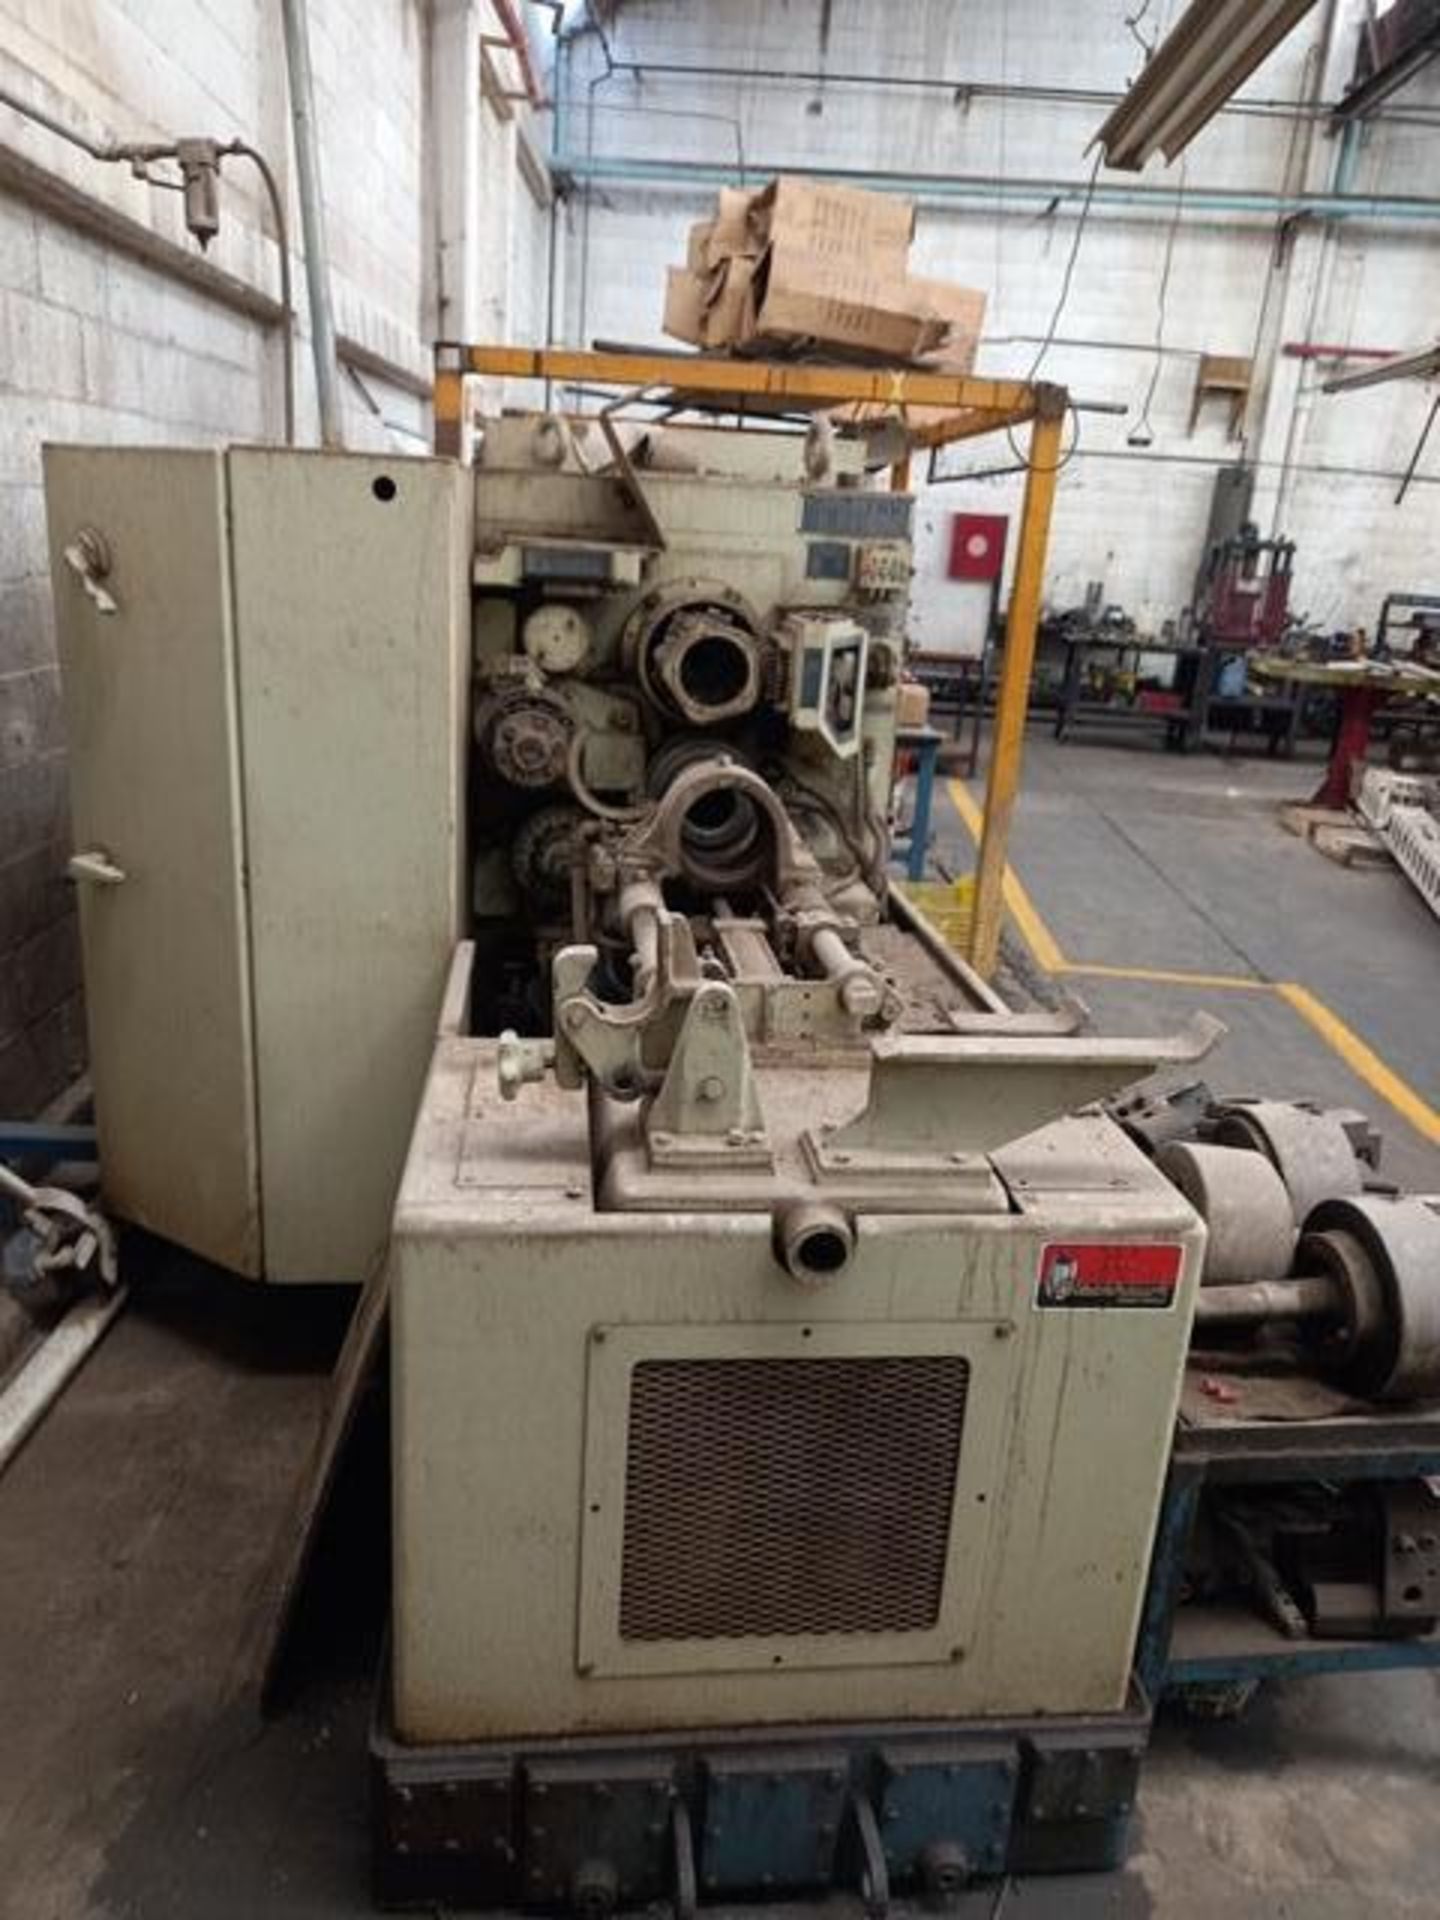 The Warner & Swasey Co 1AB M-3880 Chucker Lathe, S/N: 2232462: Spindle Speeds: 72 to 2026 Rpm, - Image 3 of 14